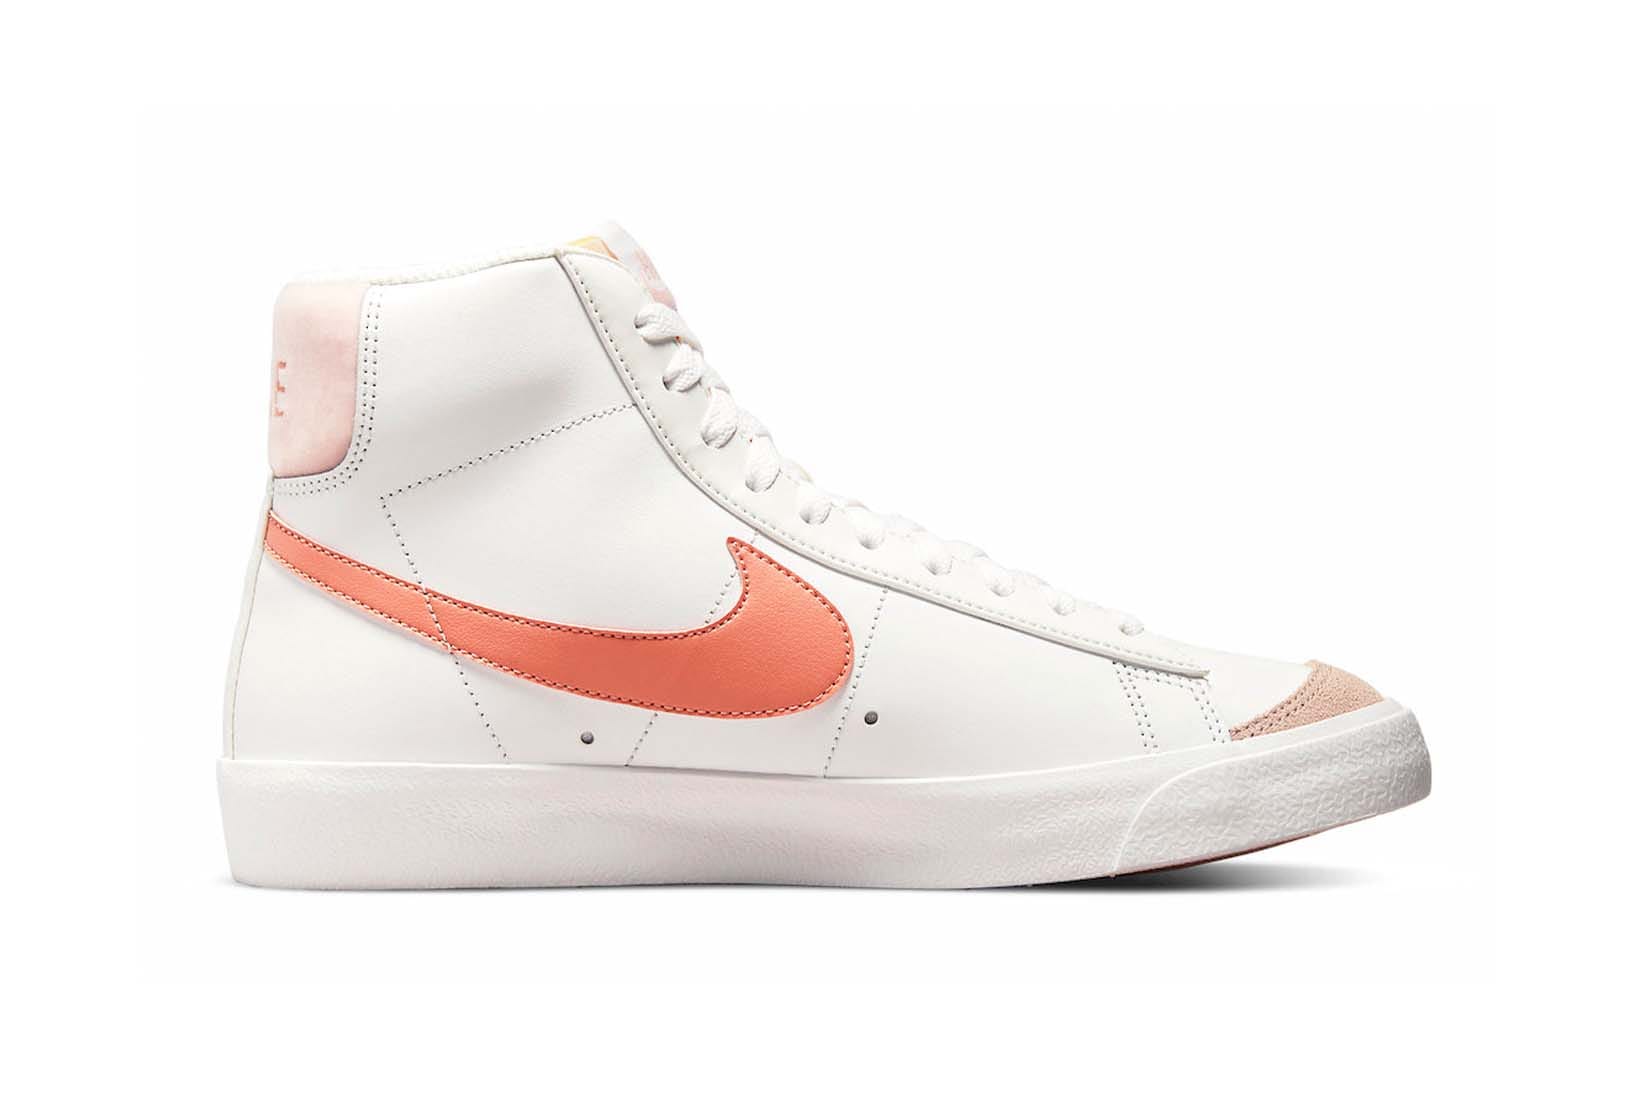 Nike Releases Pink and White Blazer for Women | HYPEBAE